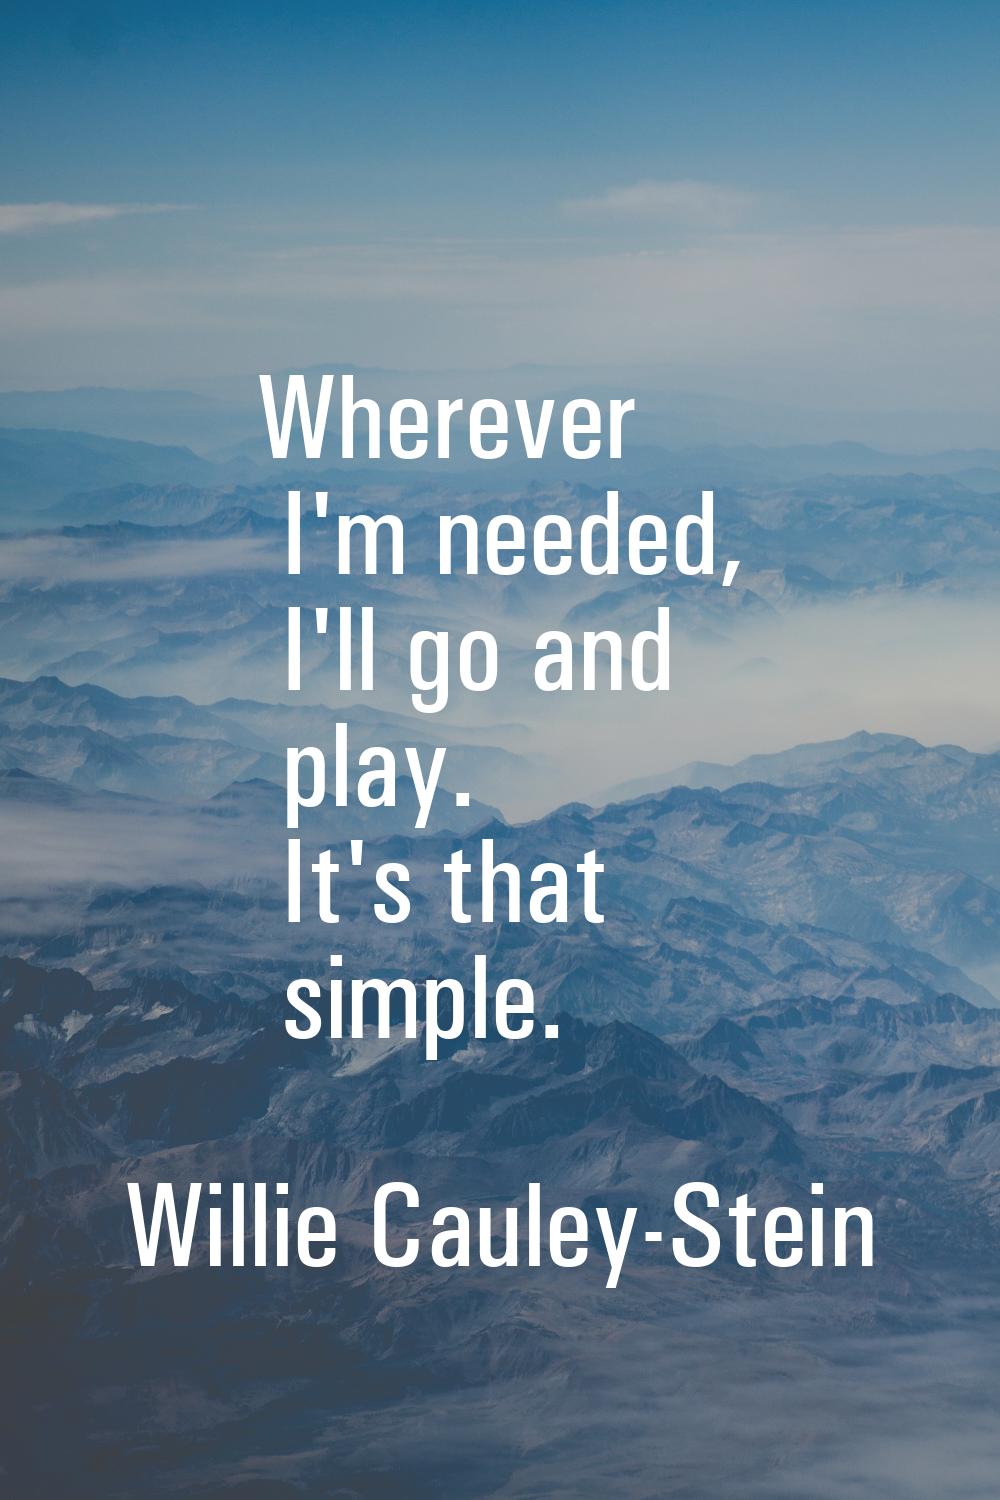 Wherever I'm needed, I'll go and play. It's that simple.